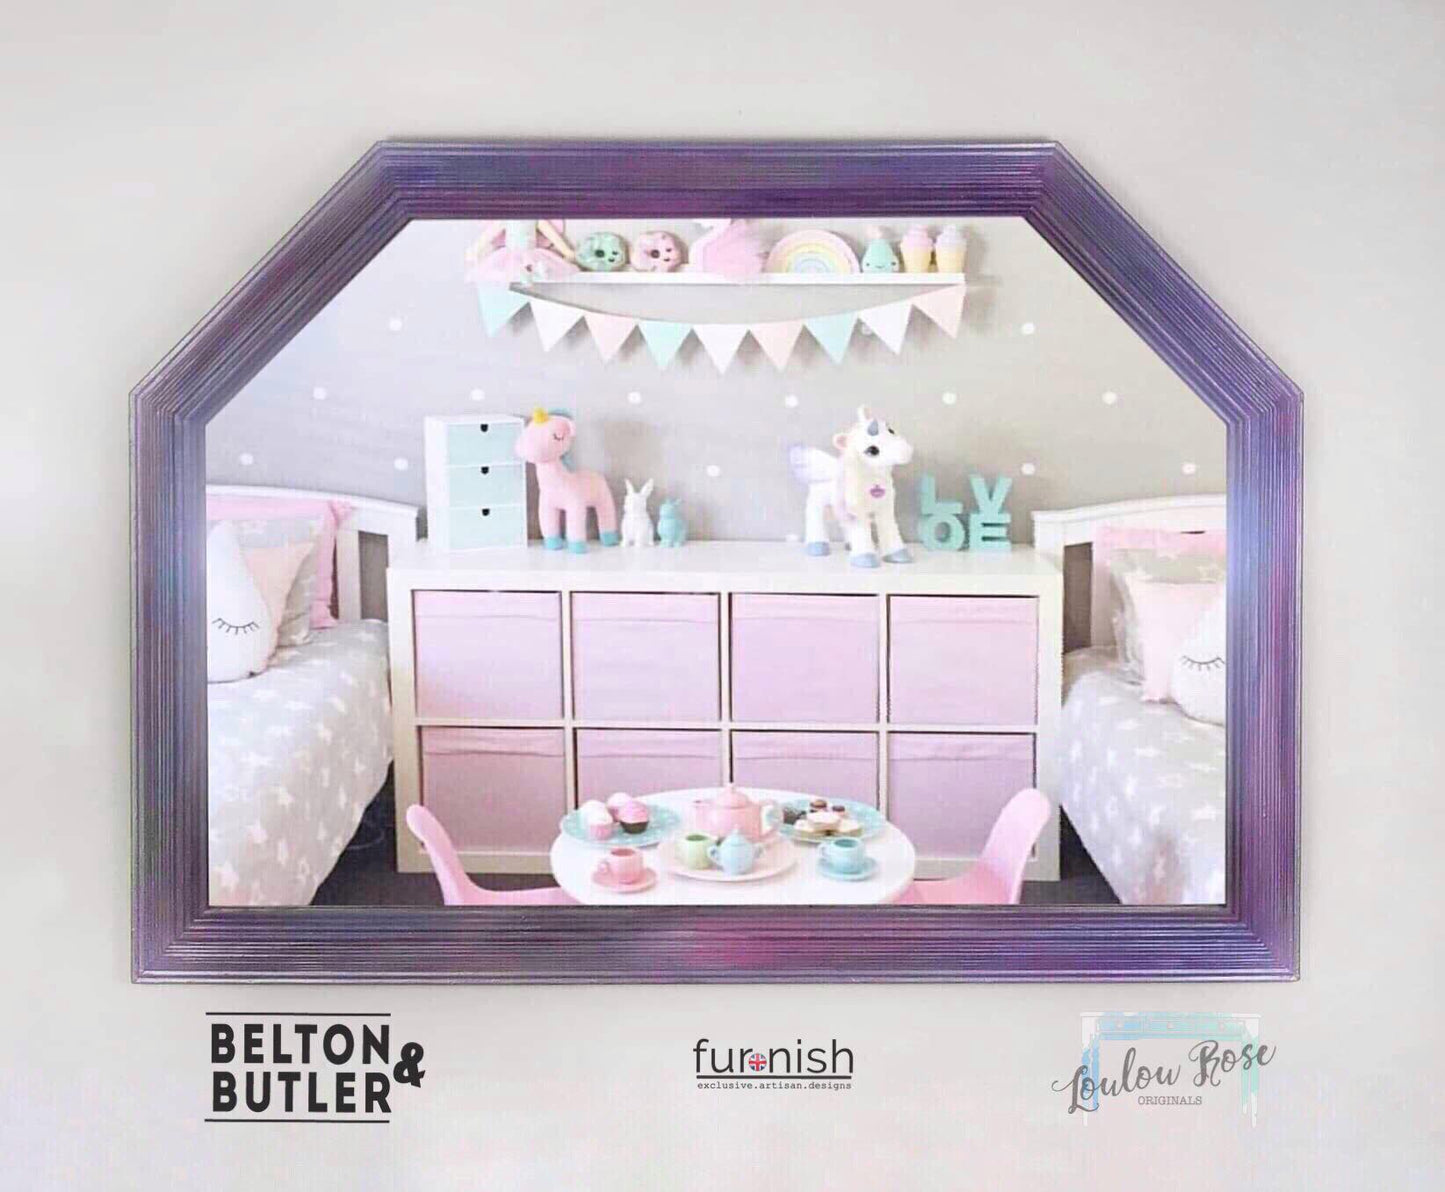 Large Wall Mirror, Hexagonal Painted in Blended Shades of Pink, Purple, Blue and White